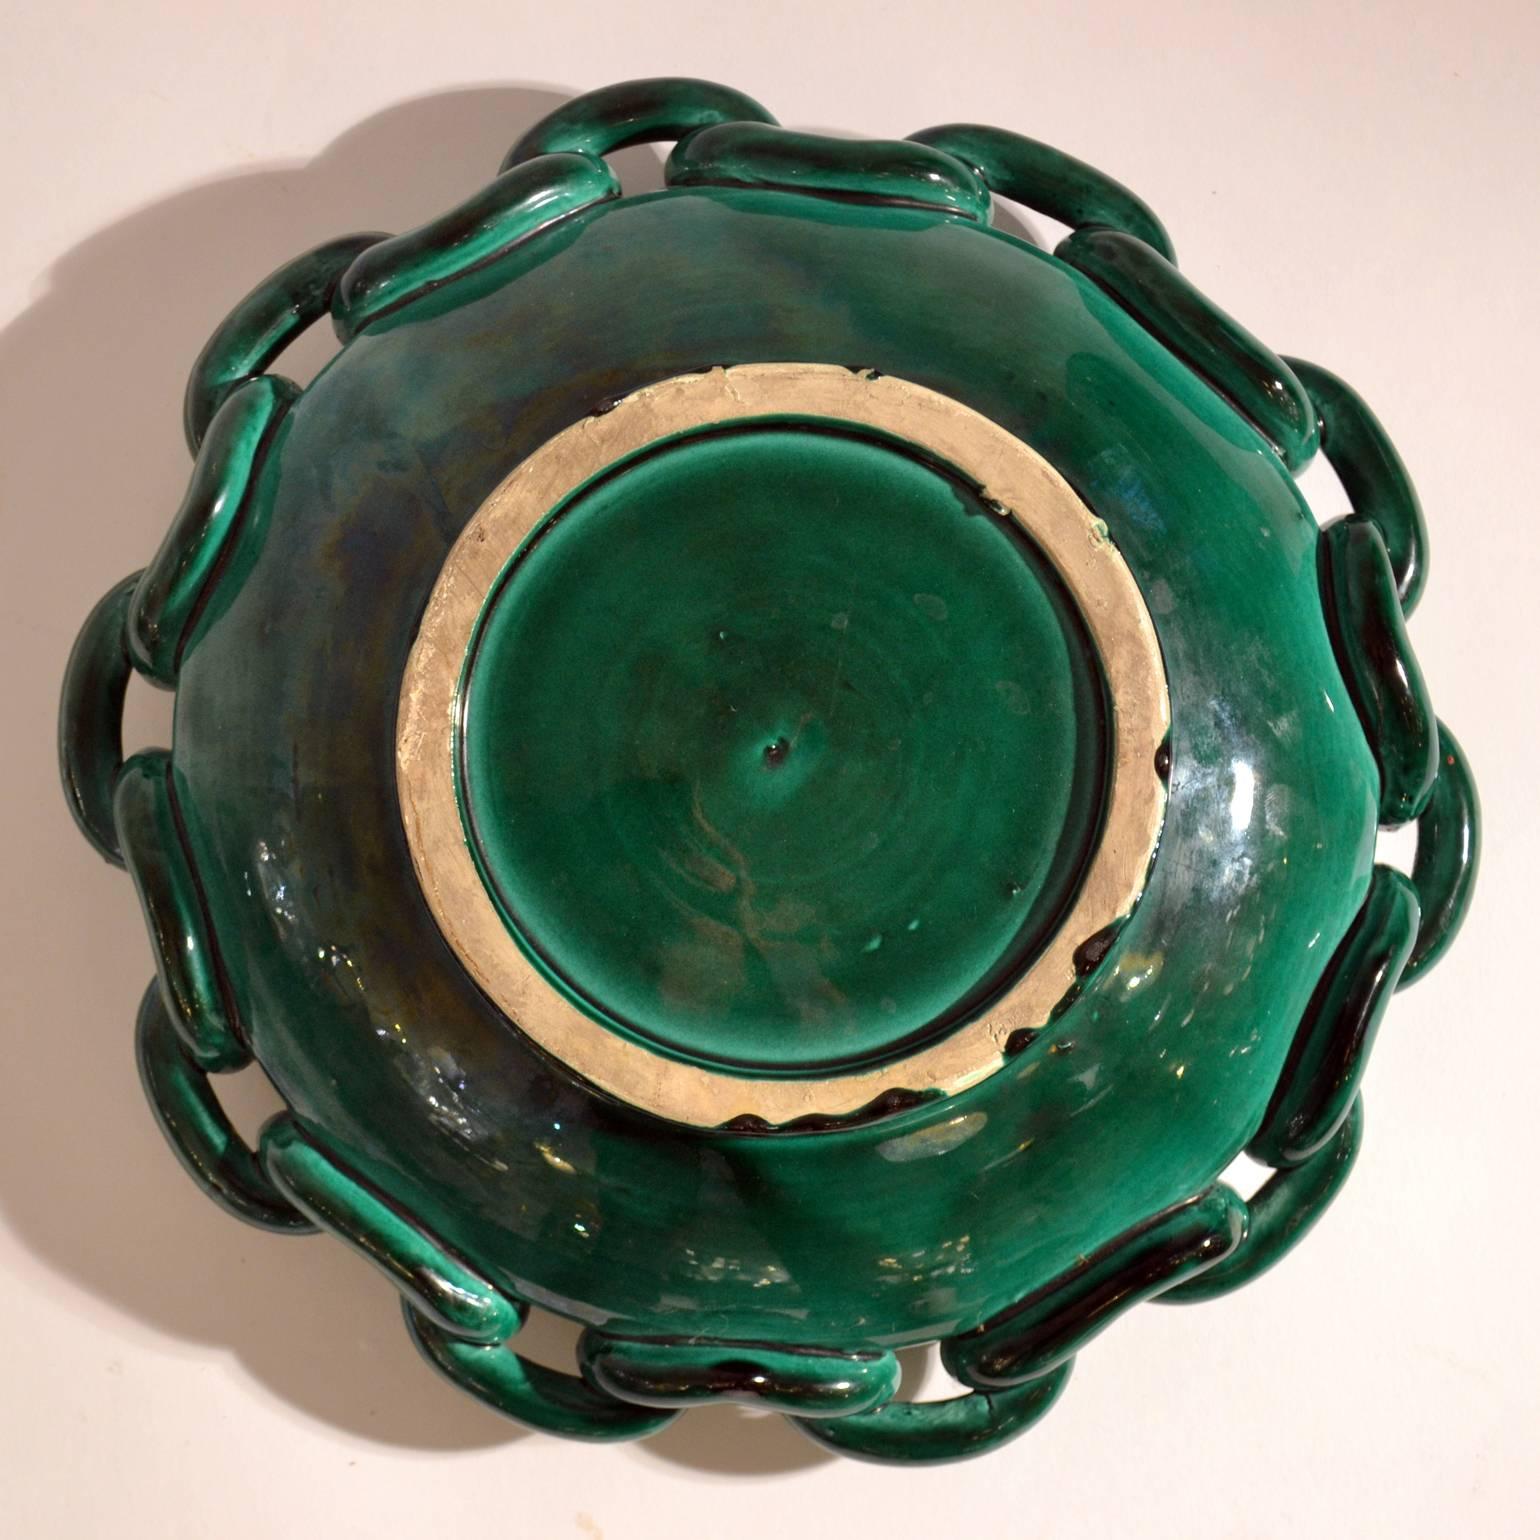 Mid-Century Modern 1950s Bowl in Emerald Green Ceramic with Chain Edge by Vallauris France